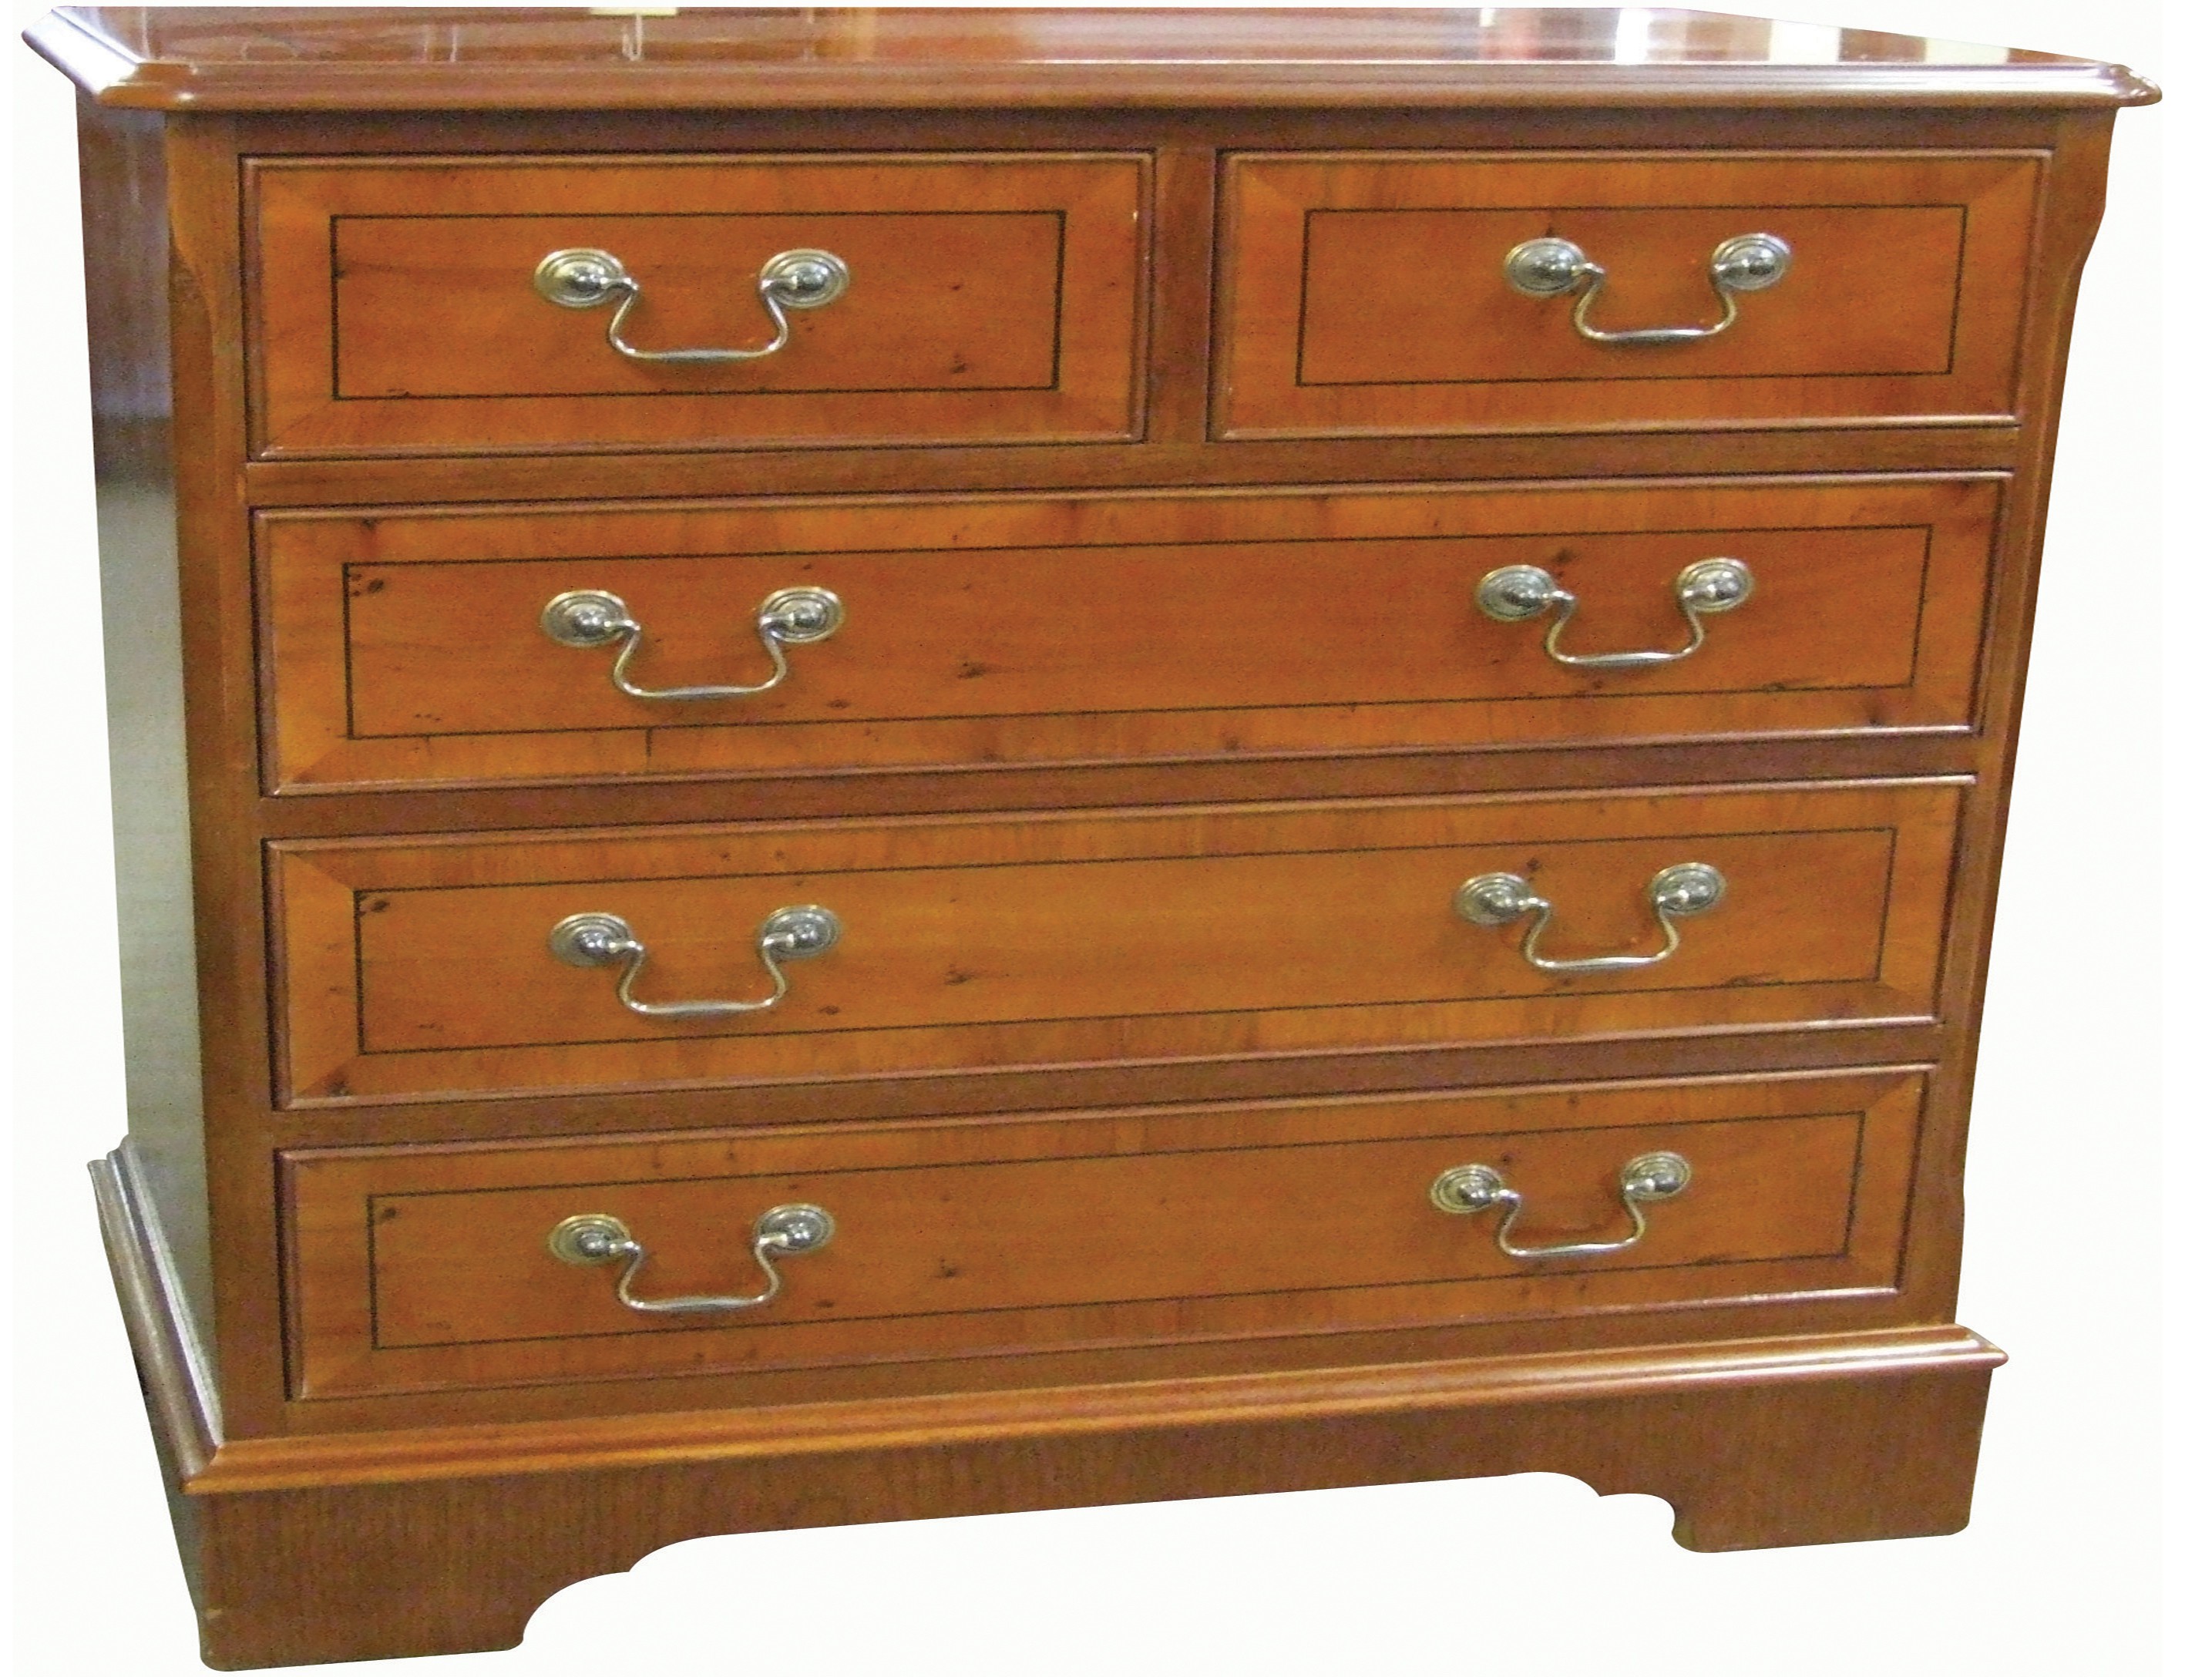 Large 5 Drawer Inlaid Chest